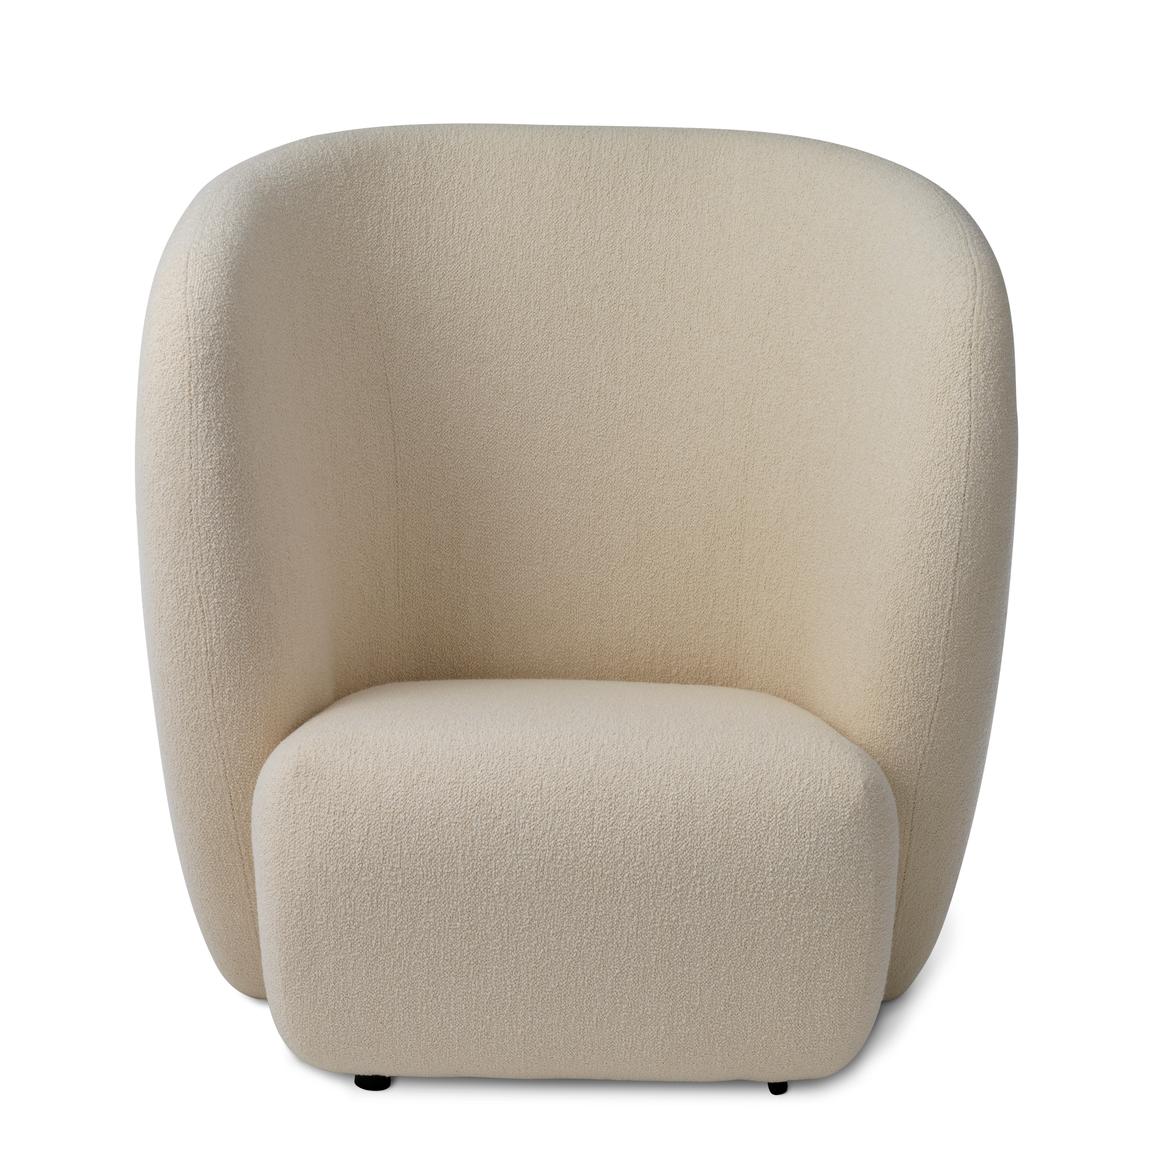 Haven Lounge chair cream by Warm Nordic
Dimensions: D107 x W84 x H 110 cm
Material: Textile upholstery, Foam, Spring system, Wood.
Weight: 50 kg
Also available in different colours and finishes. 

The Haven armchair is a contemporary chair